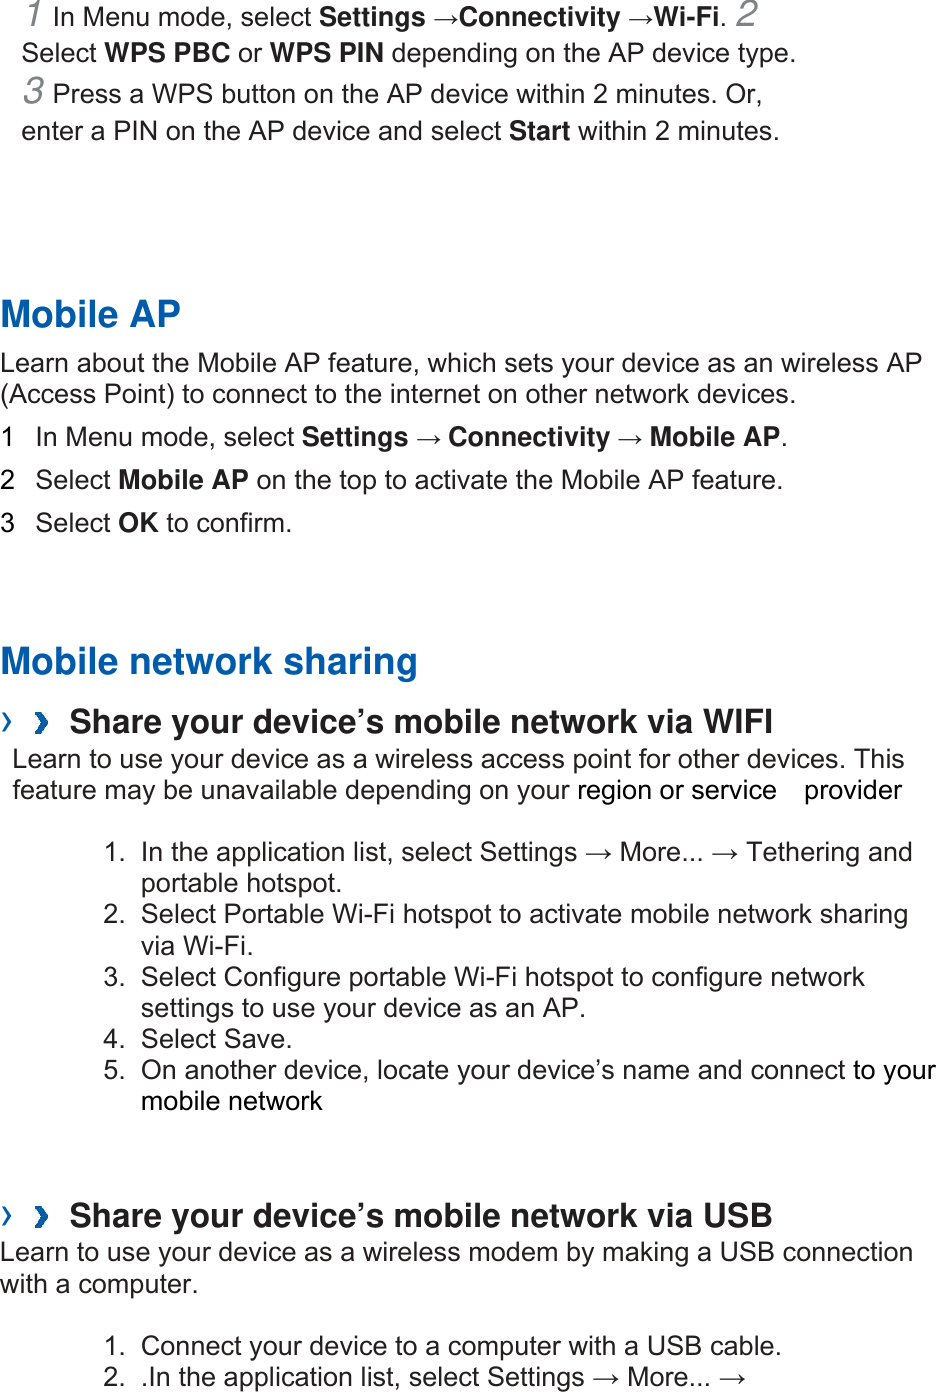 1 In Menu mode, select Settings →Connectivity →Wi-Fi. 2 Select WPS PBC or WPS PIN depending on the AP device type. 3 Press a WPS button on the AP device within 2 minutes. Or, enter a PIN on the AP device and select Start within 2 minutes.       Mobile AP   Learn about the Mobile AP feature, which sets your device as an wireless AP (Access Point) to connect to the internet on other network devices.   1  In Menu mode, select Settings → Connectivity → Mobile AP.  2  Select Mobile AP on the top to activate the Mobile AP feature.   3  Select OK to confirm.      Mobile network sharing     ›   Share your device’s mobile network via WIFI   Learn to use your device as a wireless access point for other devices. This feature may be unavailable depending on your region or service  provider  1.  In the application list, select Settings → More... → Tethering and portable hotspot. 2.  Select Portable Wi-Fi hotspot to activate mobile network sharing via Wi-Fi. 3.  Select Configure portable Wi-Fi hotspot to configure network settings to use your device as an AP. 4. Select Save. 5.  On another device, locate your device’s name and connect to your mobile network   ›   Share your device’s mobile network via USB   Learn to use your device as a wireless modem by making a USB connection with a computer.  1.  Connect your device to a computer with a USB cable. 2.  .In the application list, select Settings → More... → 